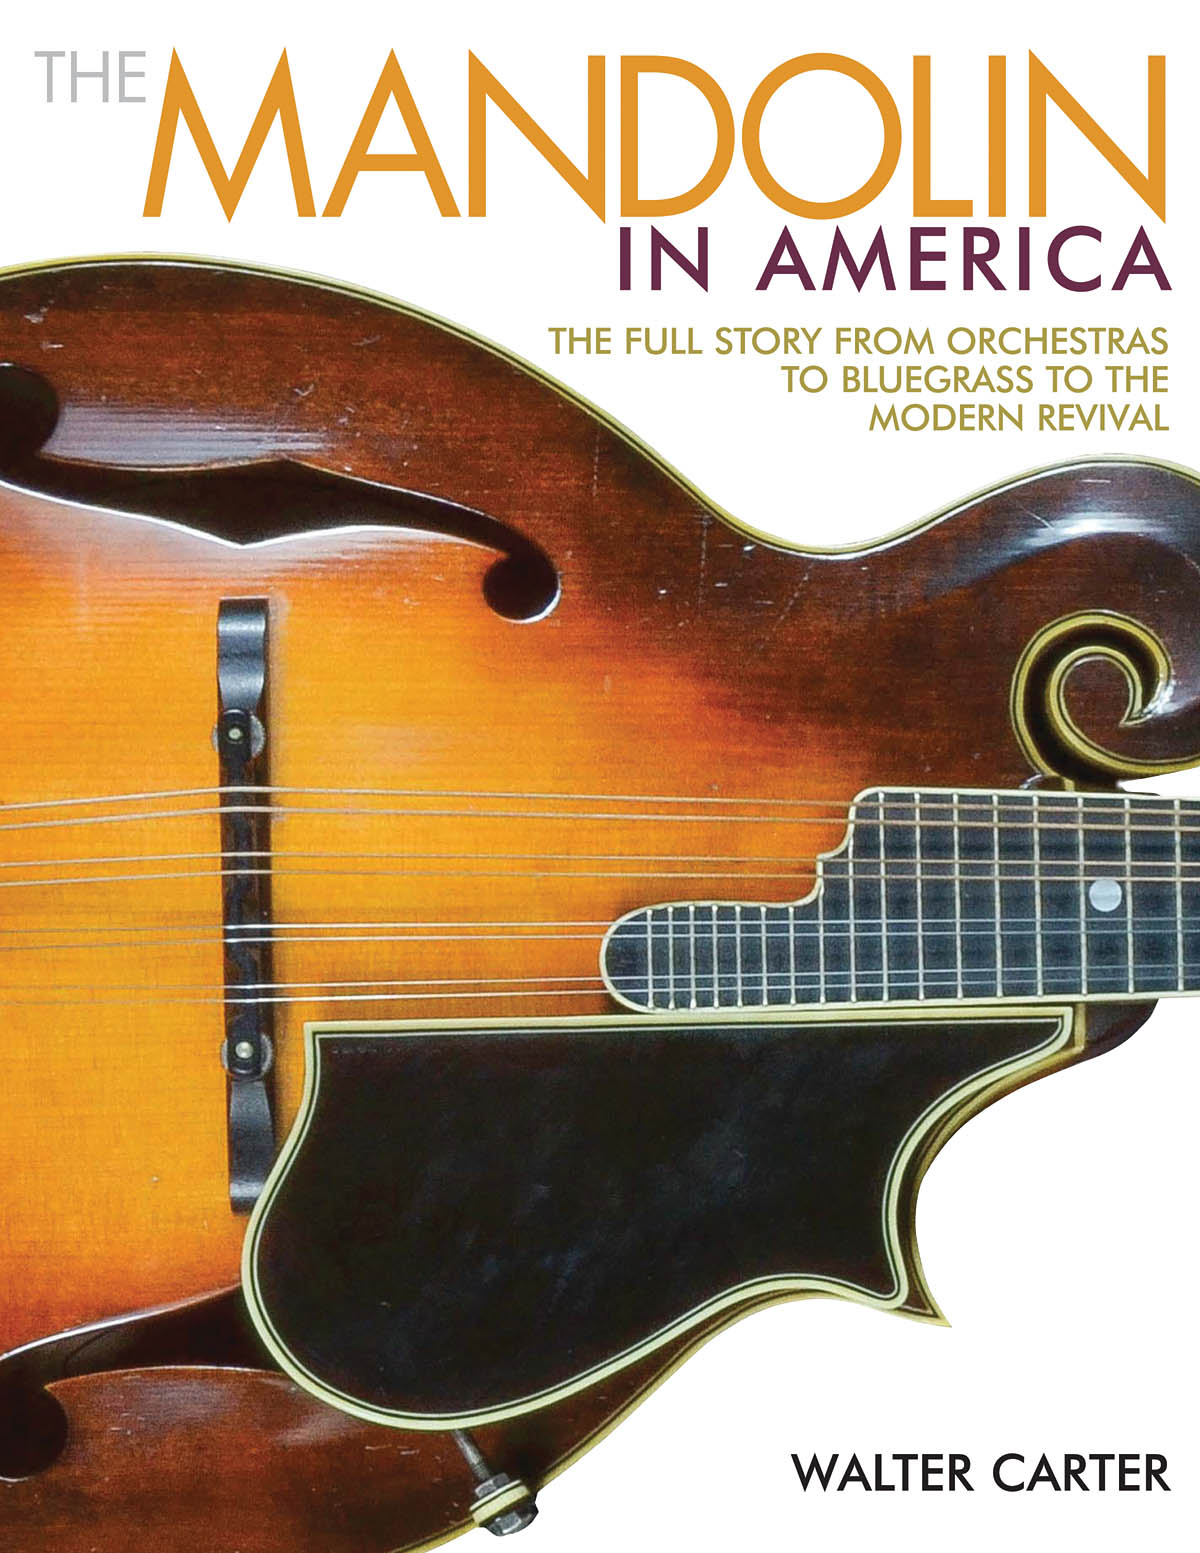 The Mandolin in America: Reference Books: History